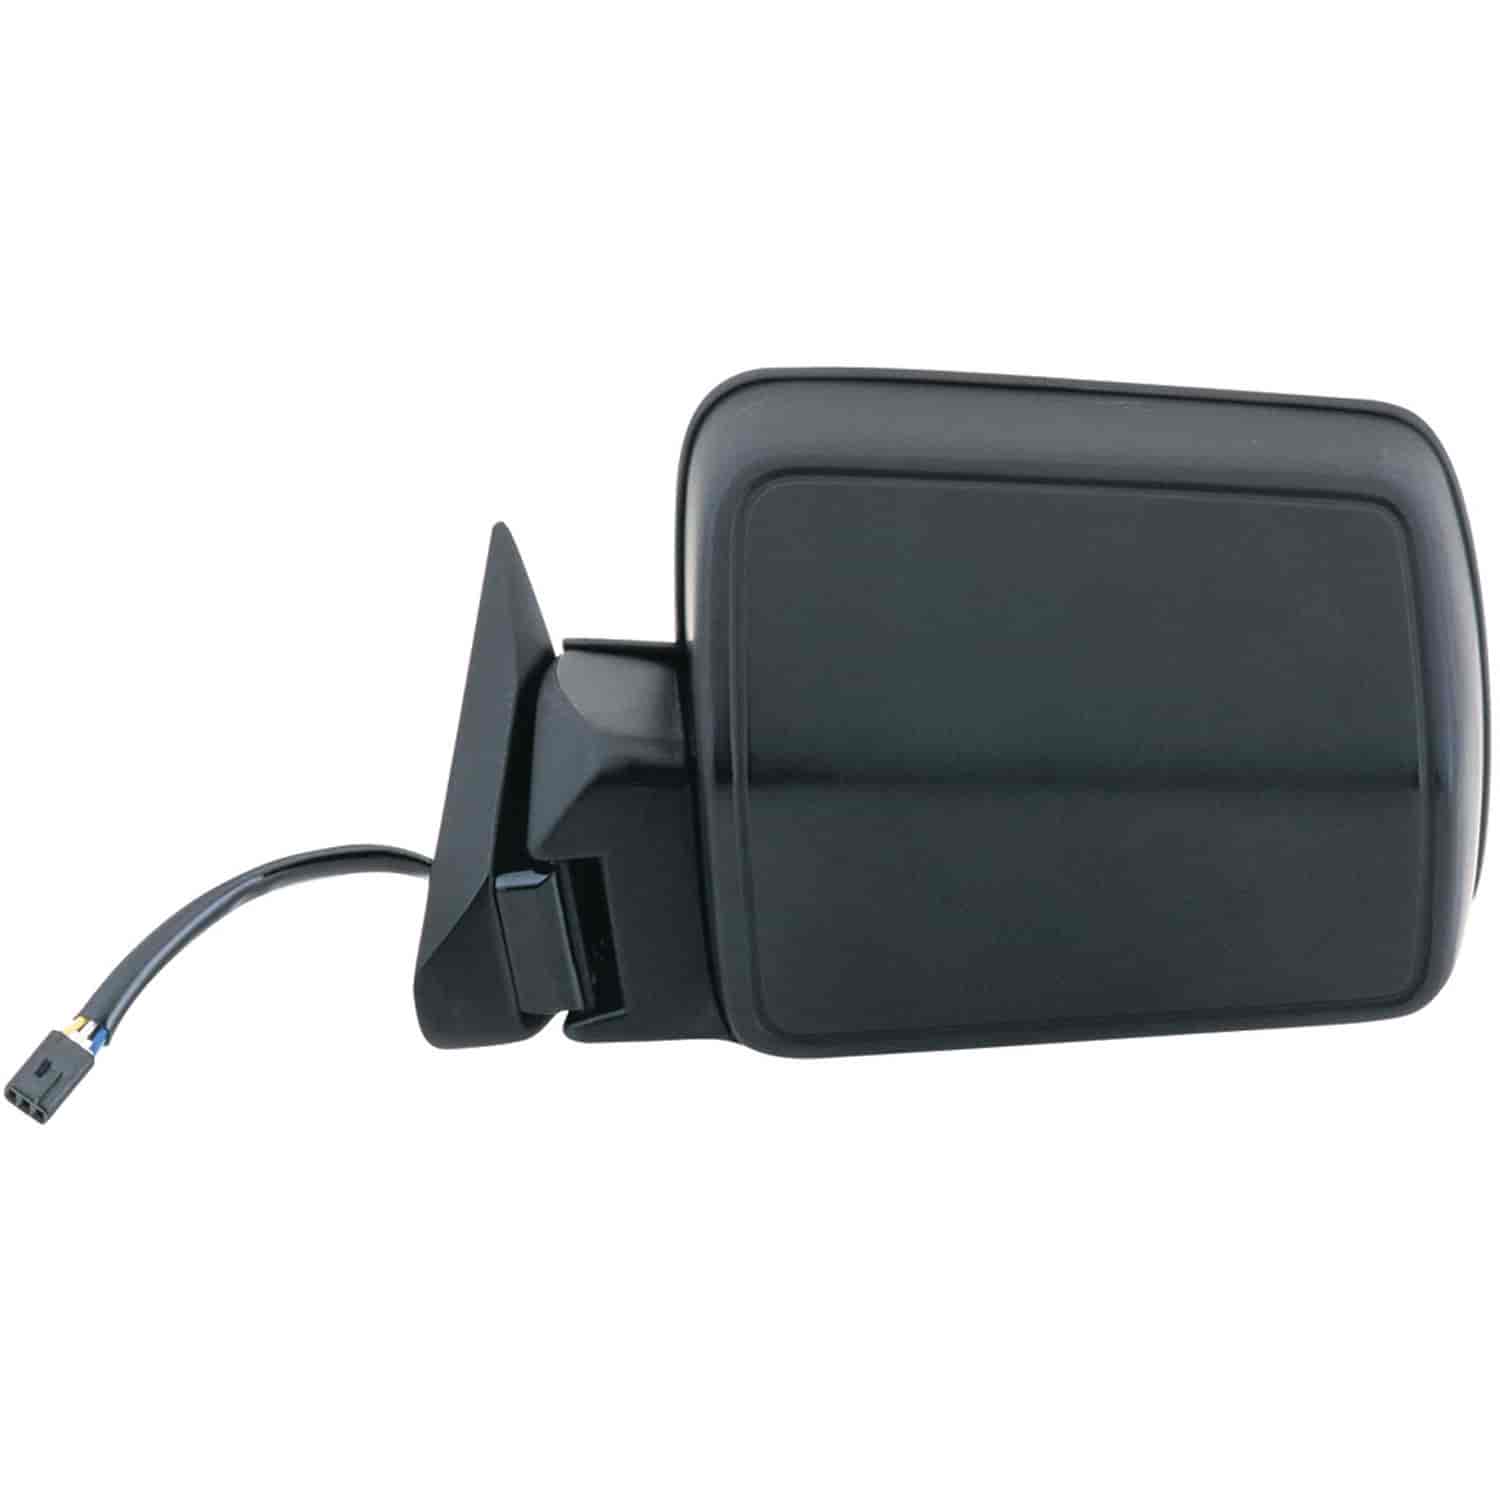 OEM Style Replacement mirror for 84-96 JEEP Cherokee/